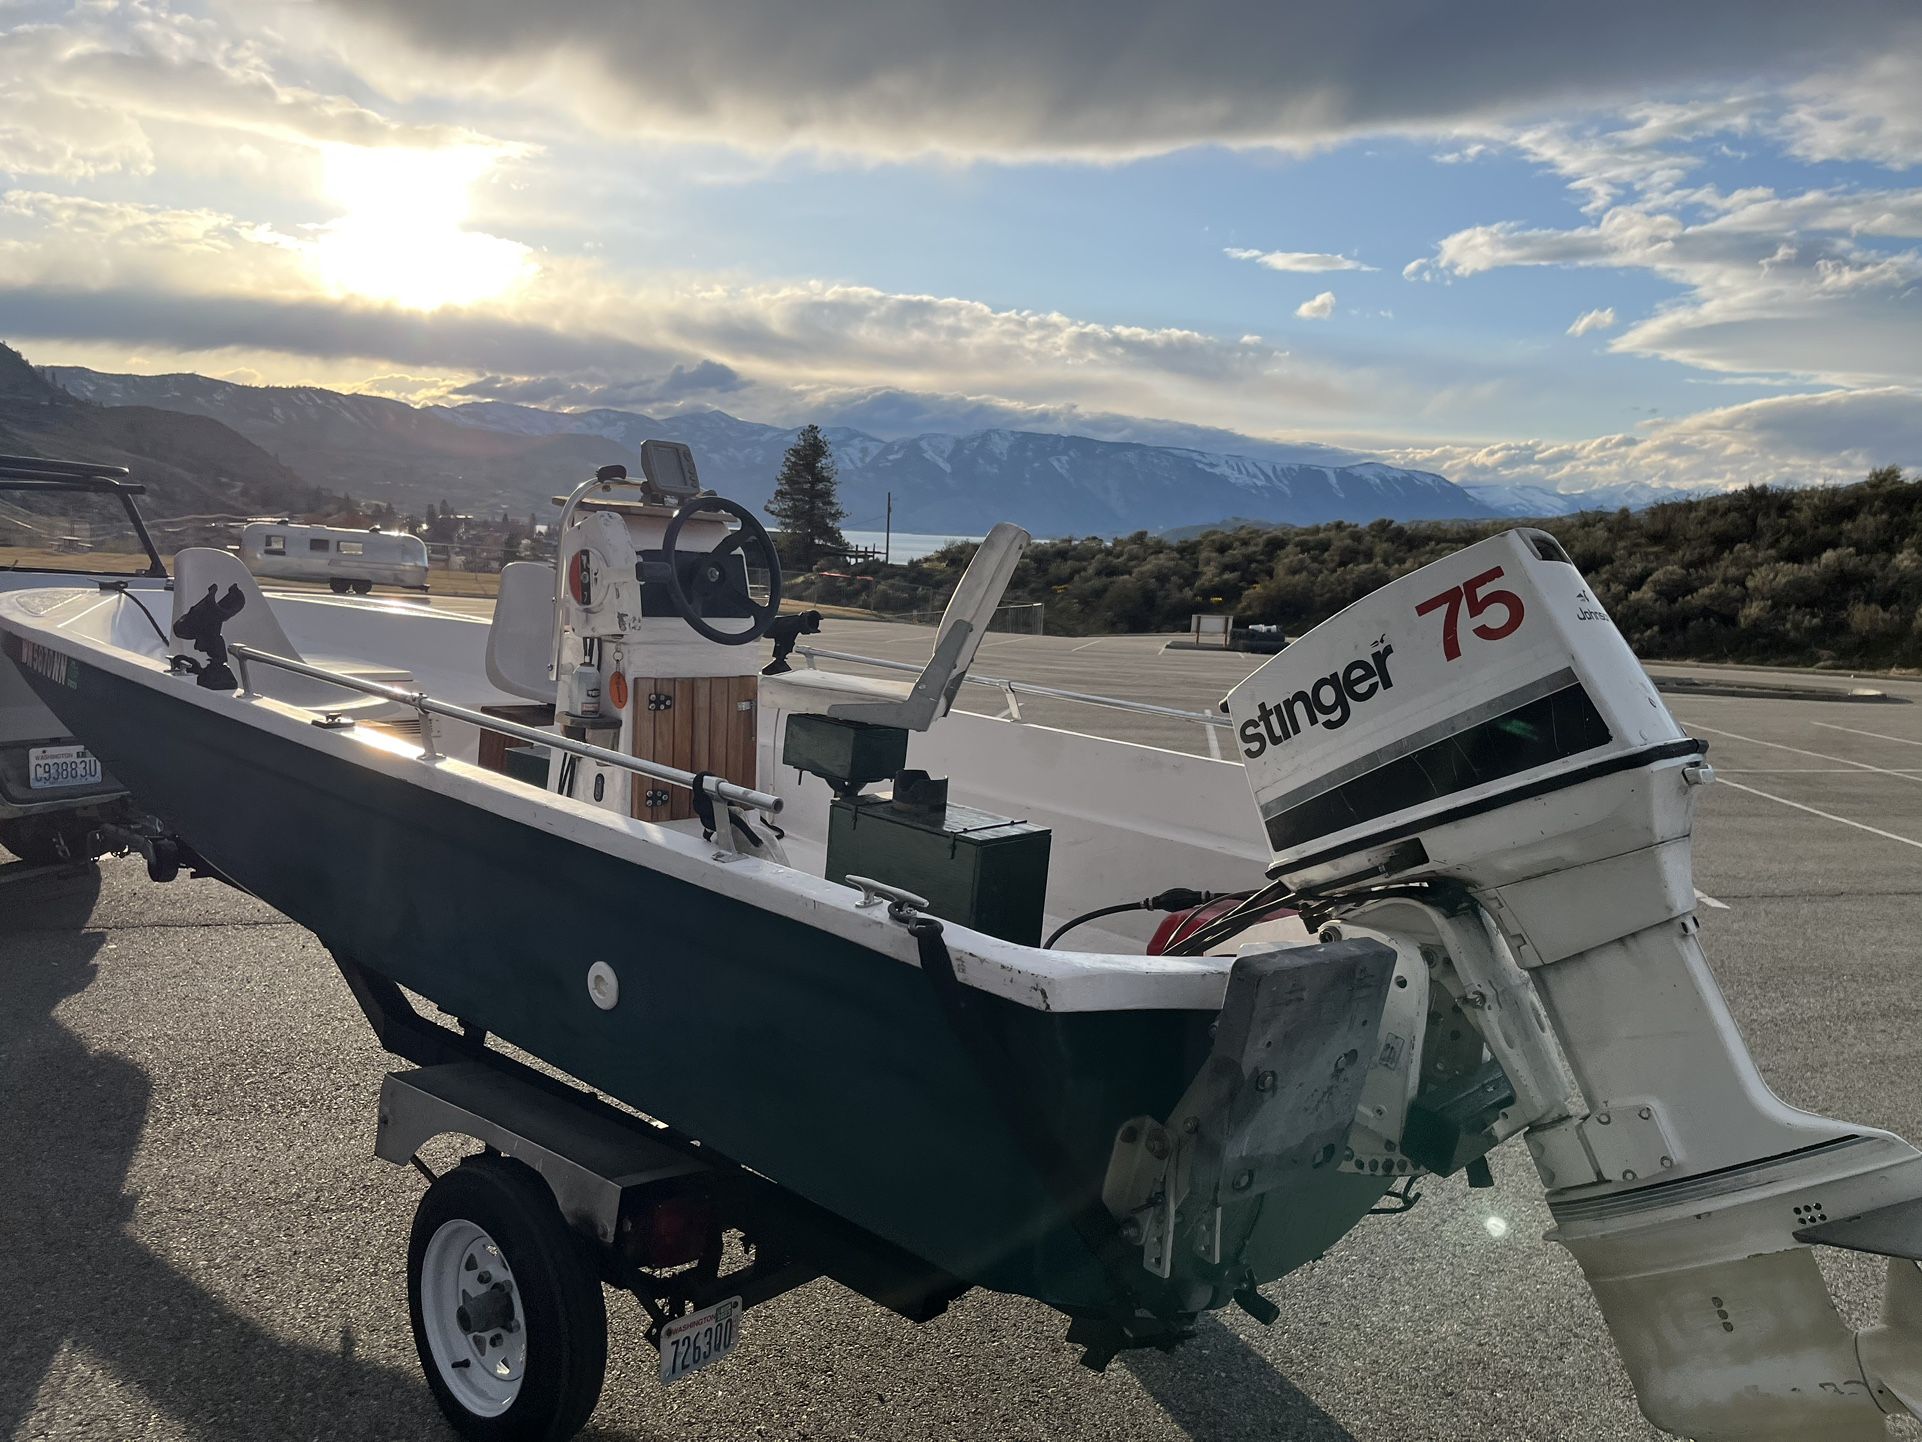 1974 Center Console Fishing boat